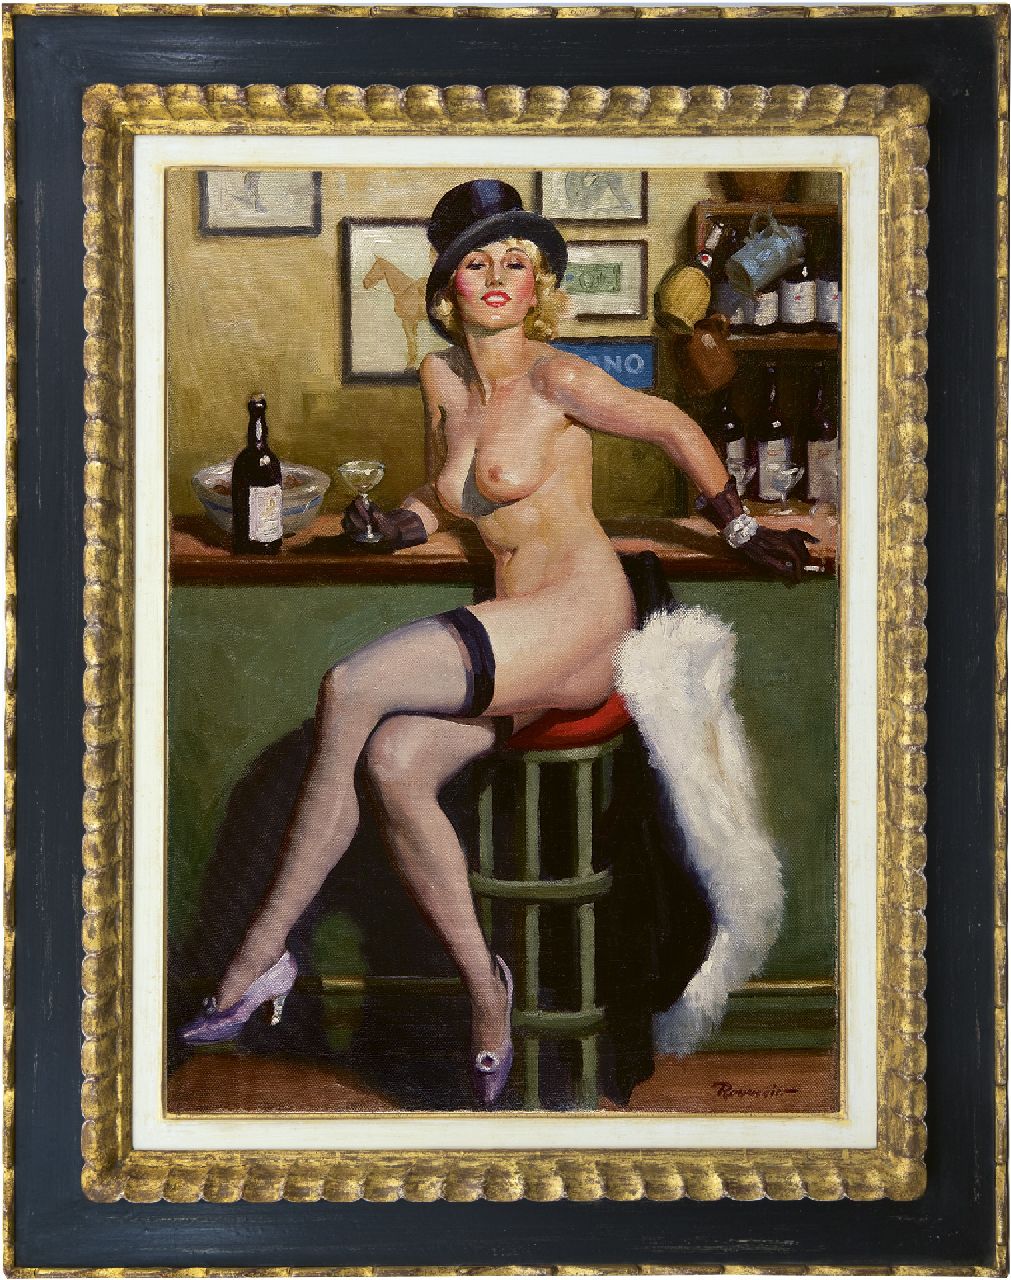 Reusswig H.W.  | Henry 'William' Reusswig, Entertainment at the bar, oil on canvas 71.6 x 51.1 cm, signed l.r. and painted in the 1930s